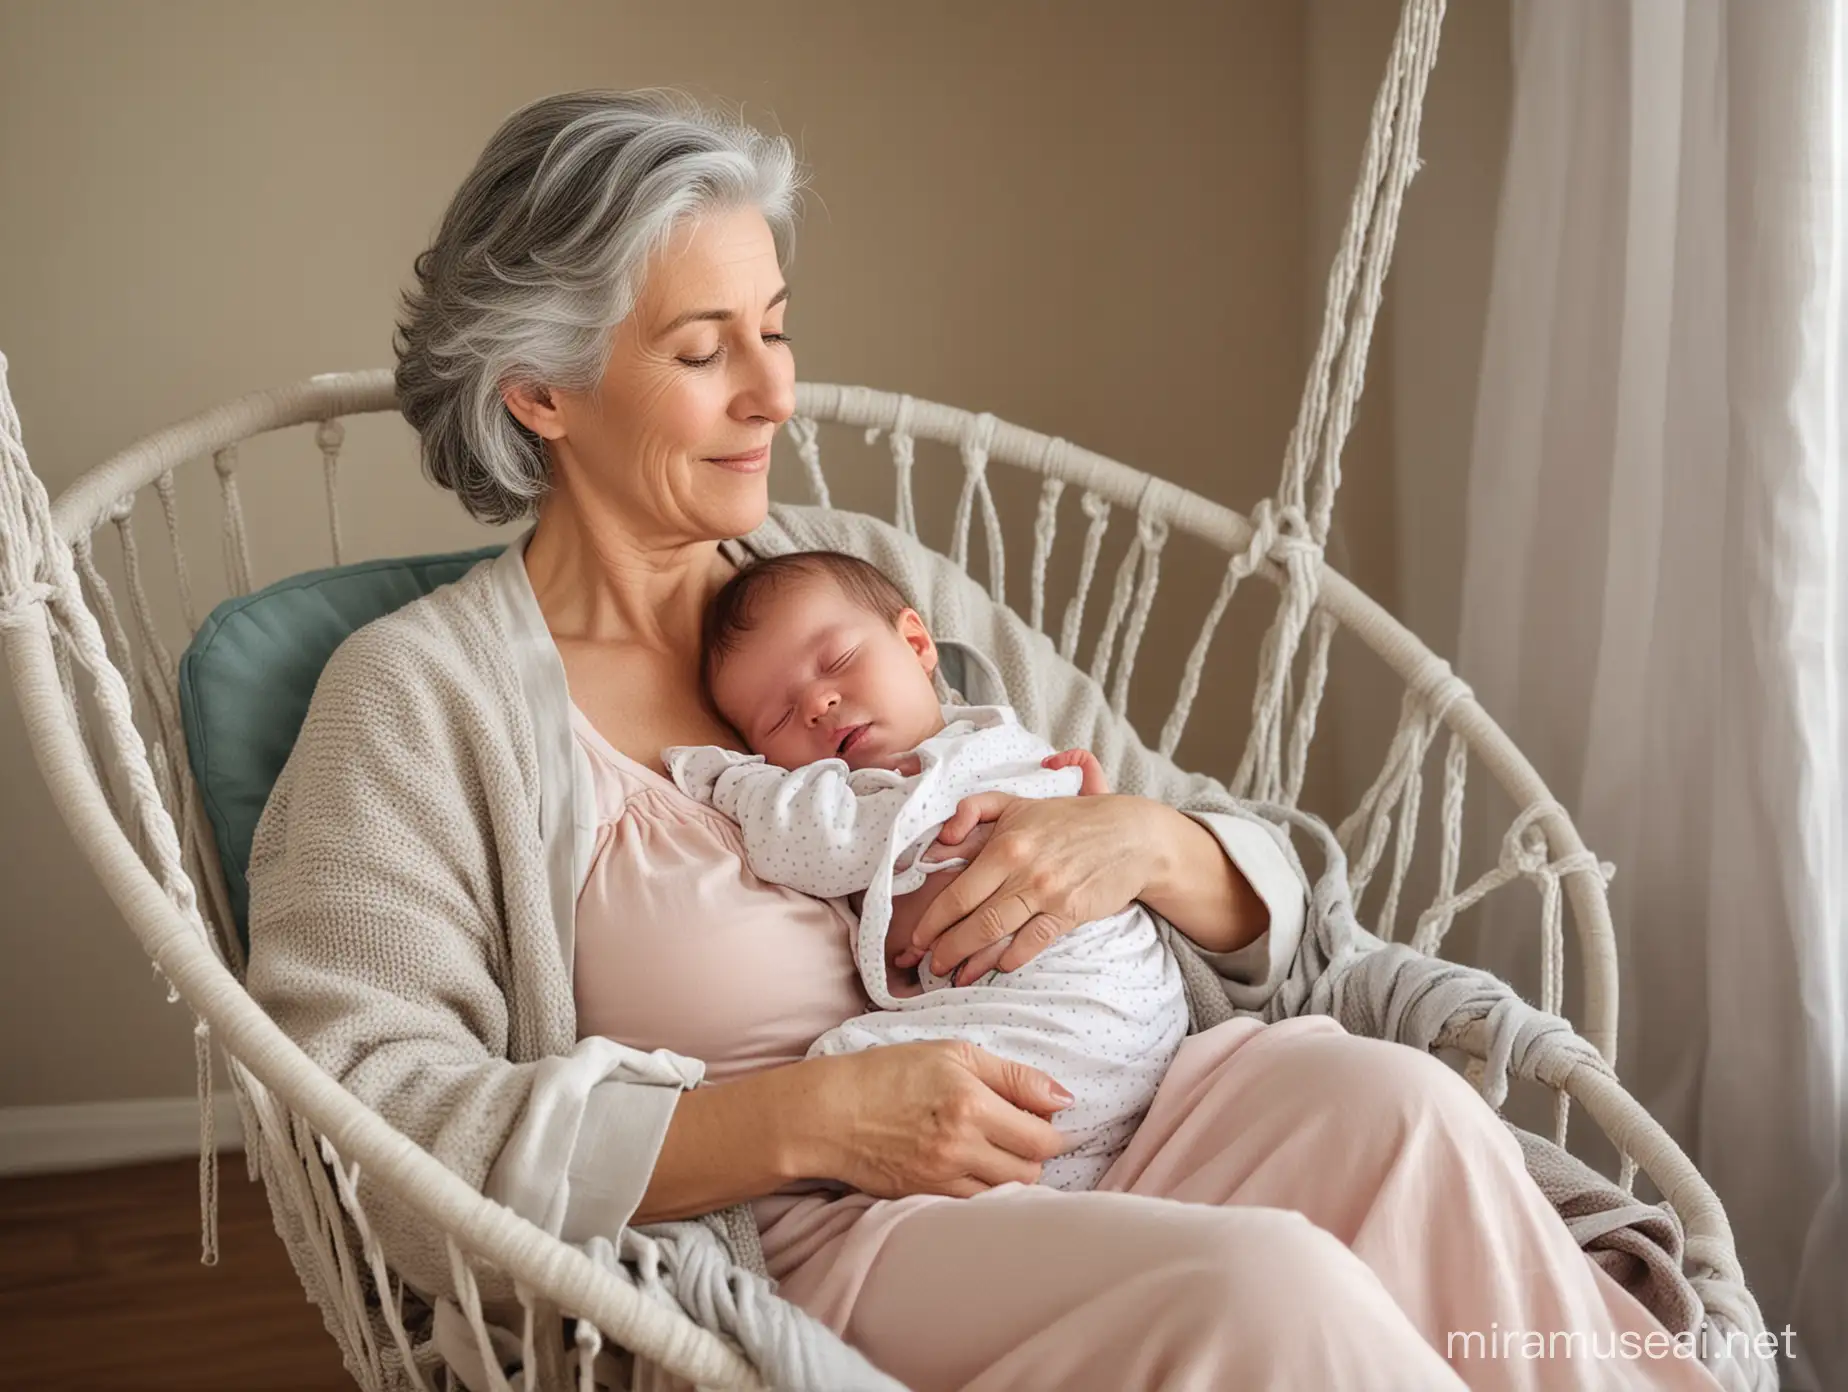 An old, gray-haired woman has just given birth to a child and is breastfeeding the child while sitting in a swing chair.